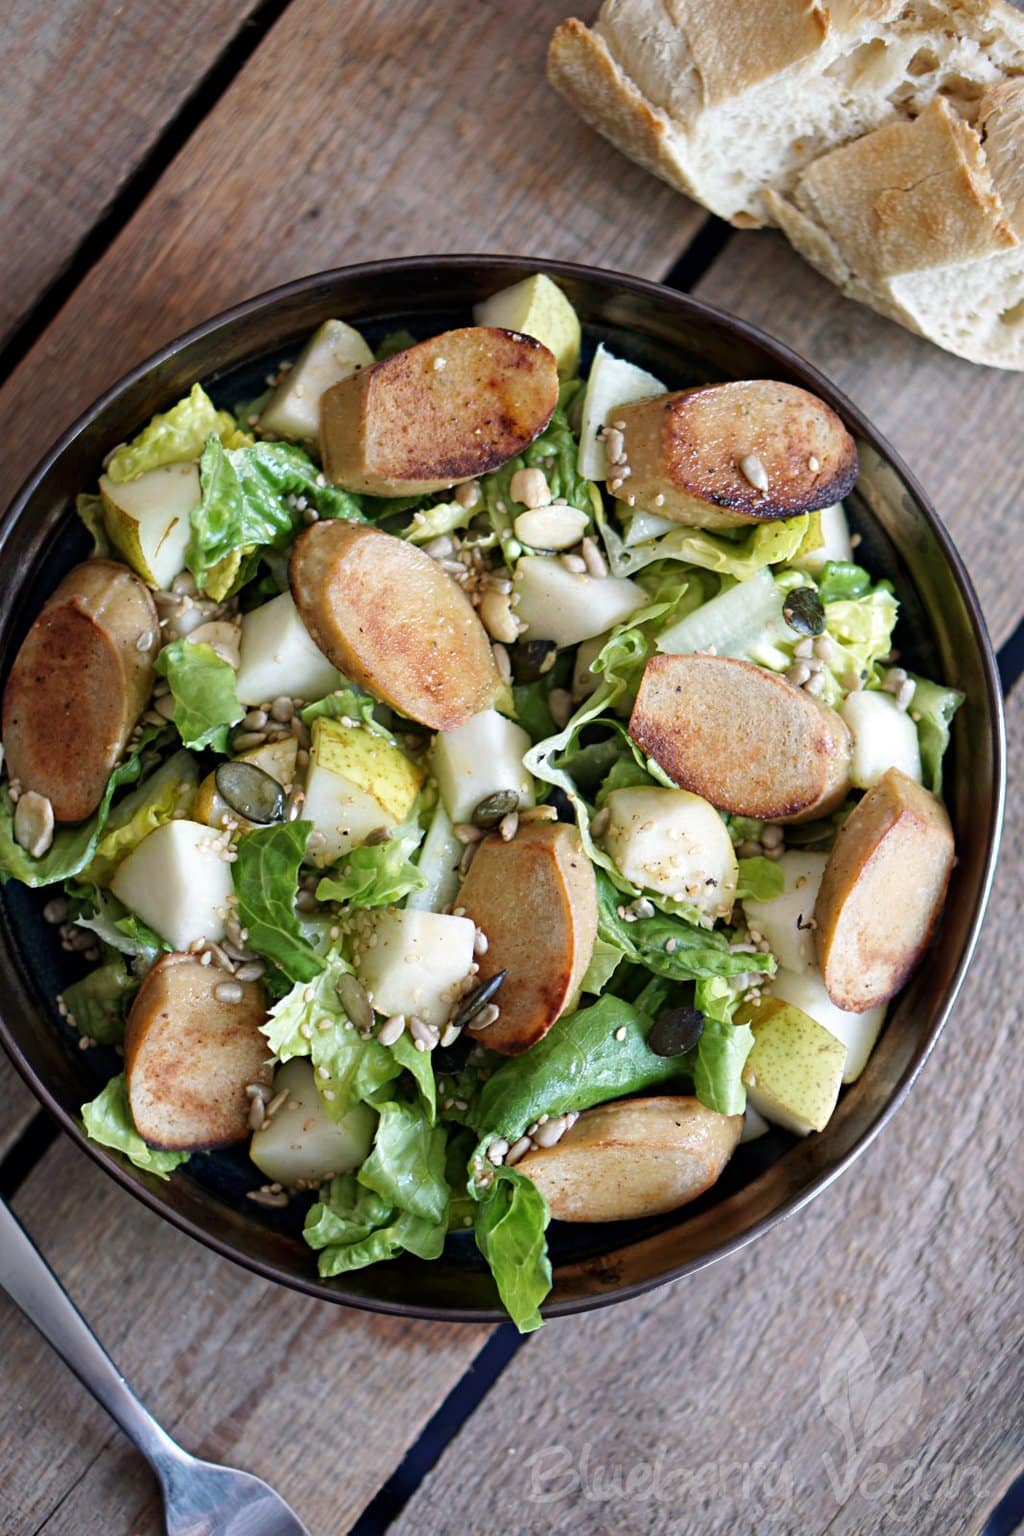 Salad with Pear and Bratwurst